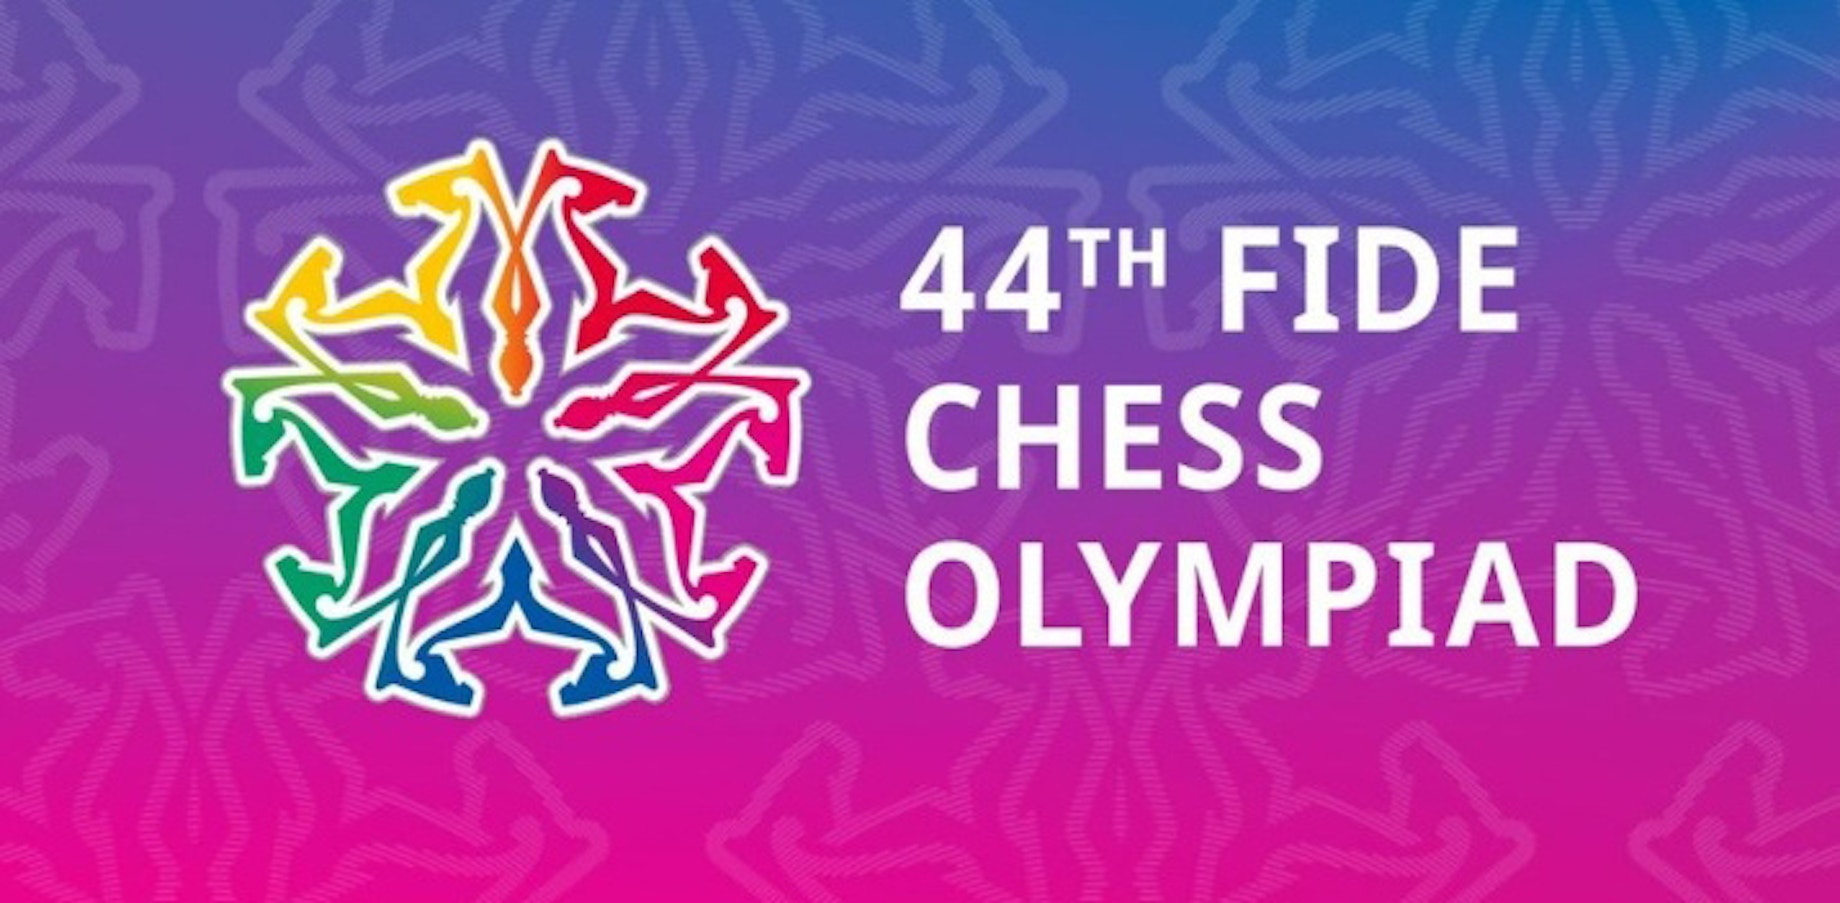 logo of the 44th fide chess olympiad with background